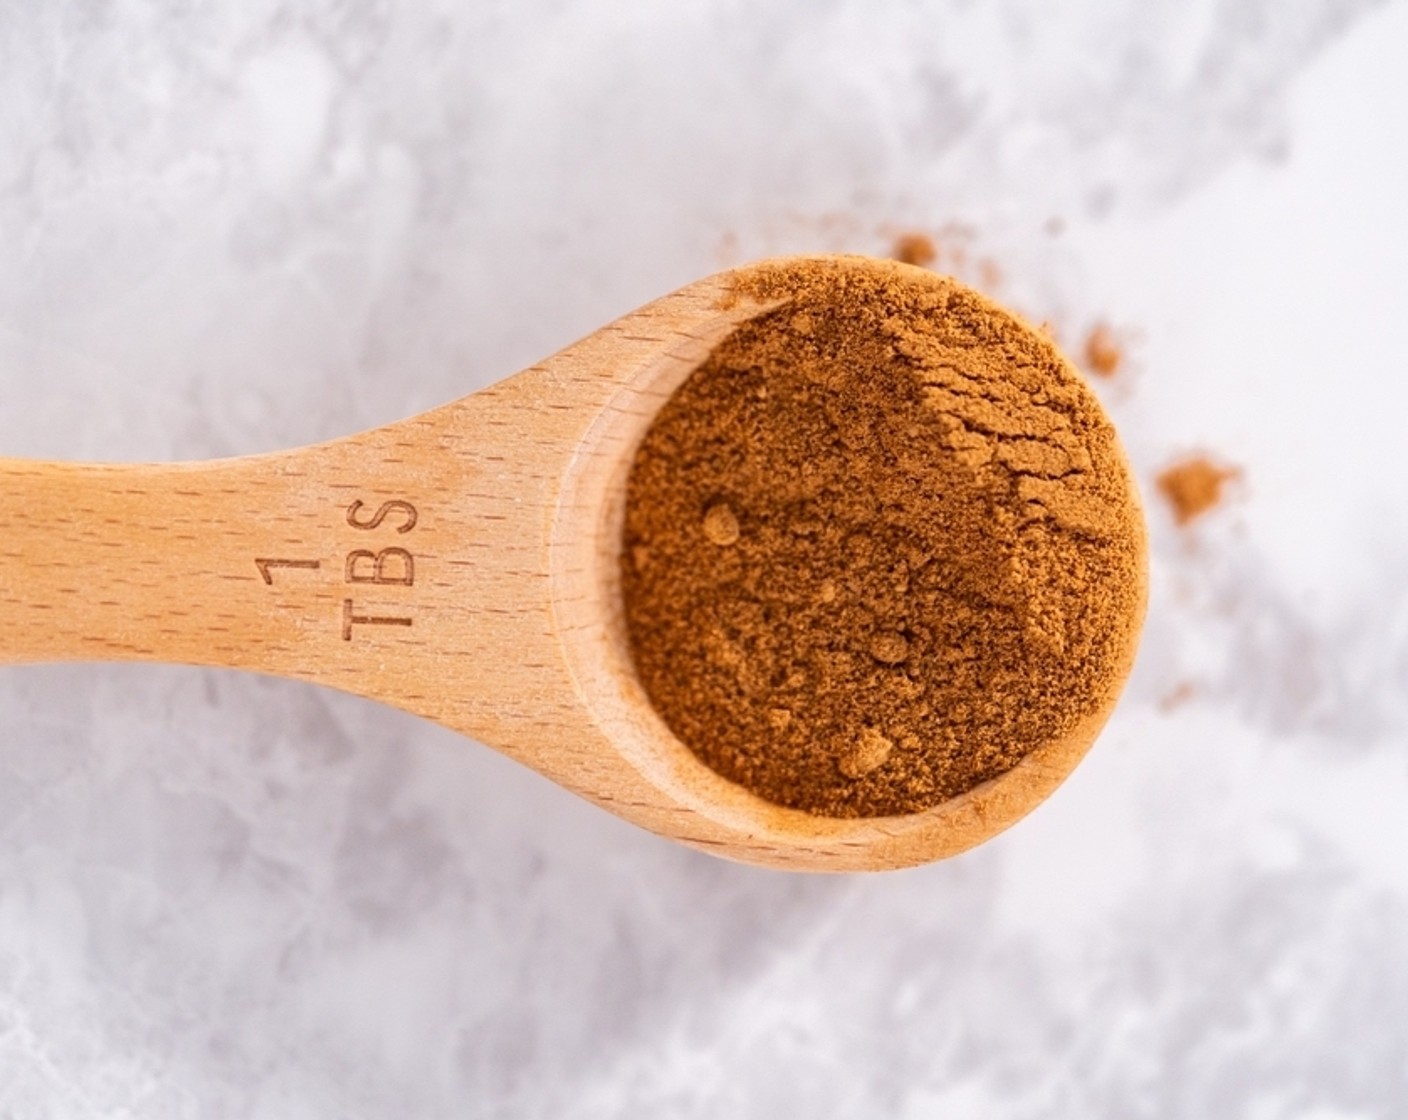 step 1 In a small mixing bowl, add Ground Cinnamon (1/2 cup), Ground Nutmeg (1 Tbsp), Ground Ginger (1 Tbsp), Ground Allspice (1/2 Tbsp), Ground Cloves (1/2 Tbsp) together and mix well. Store in an air-tight container for up to 6 months in a cool, dry place.